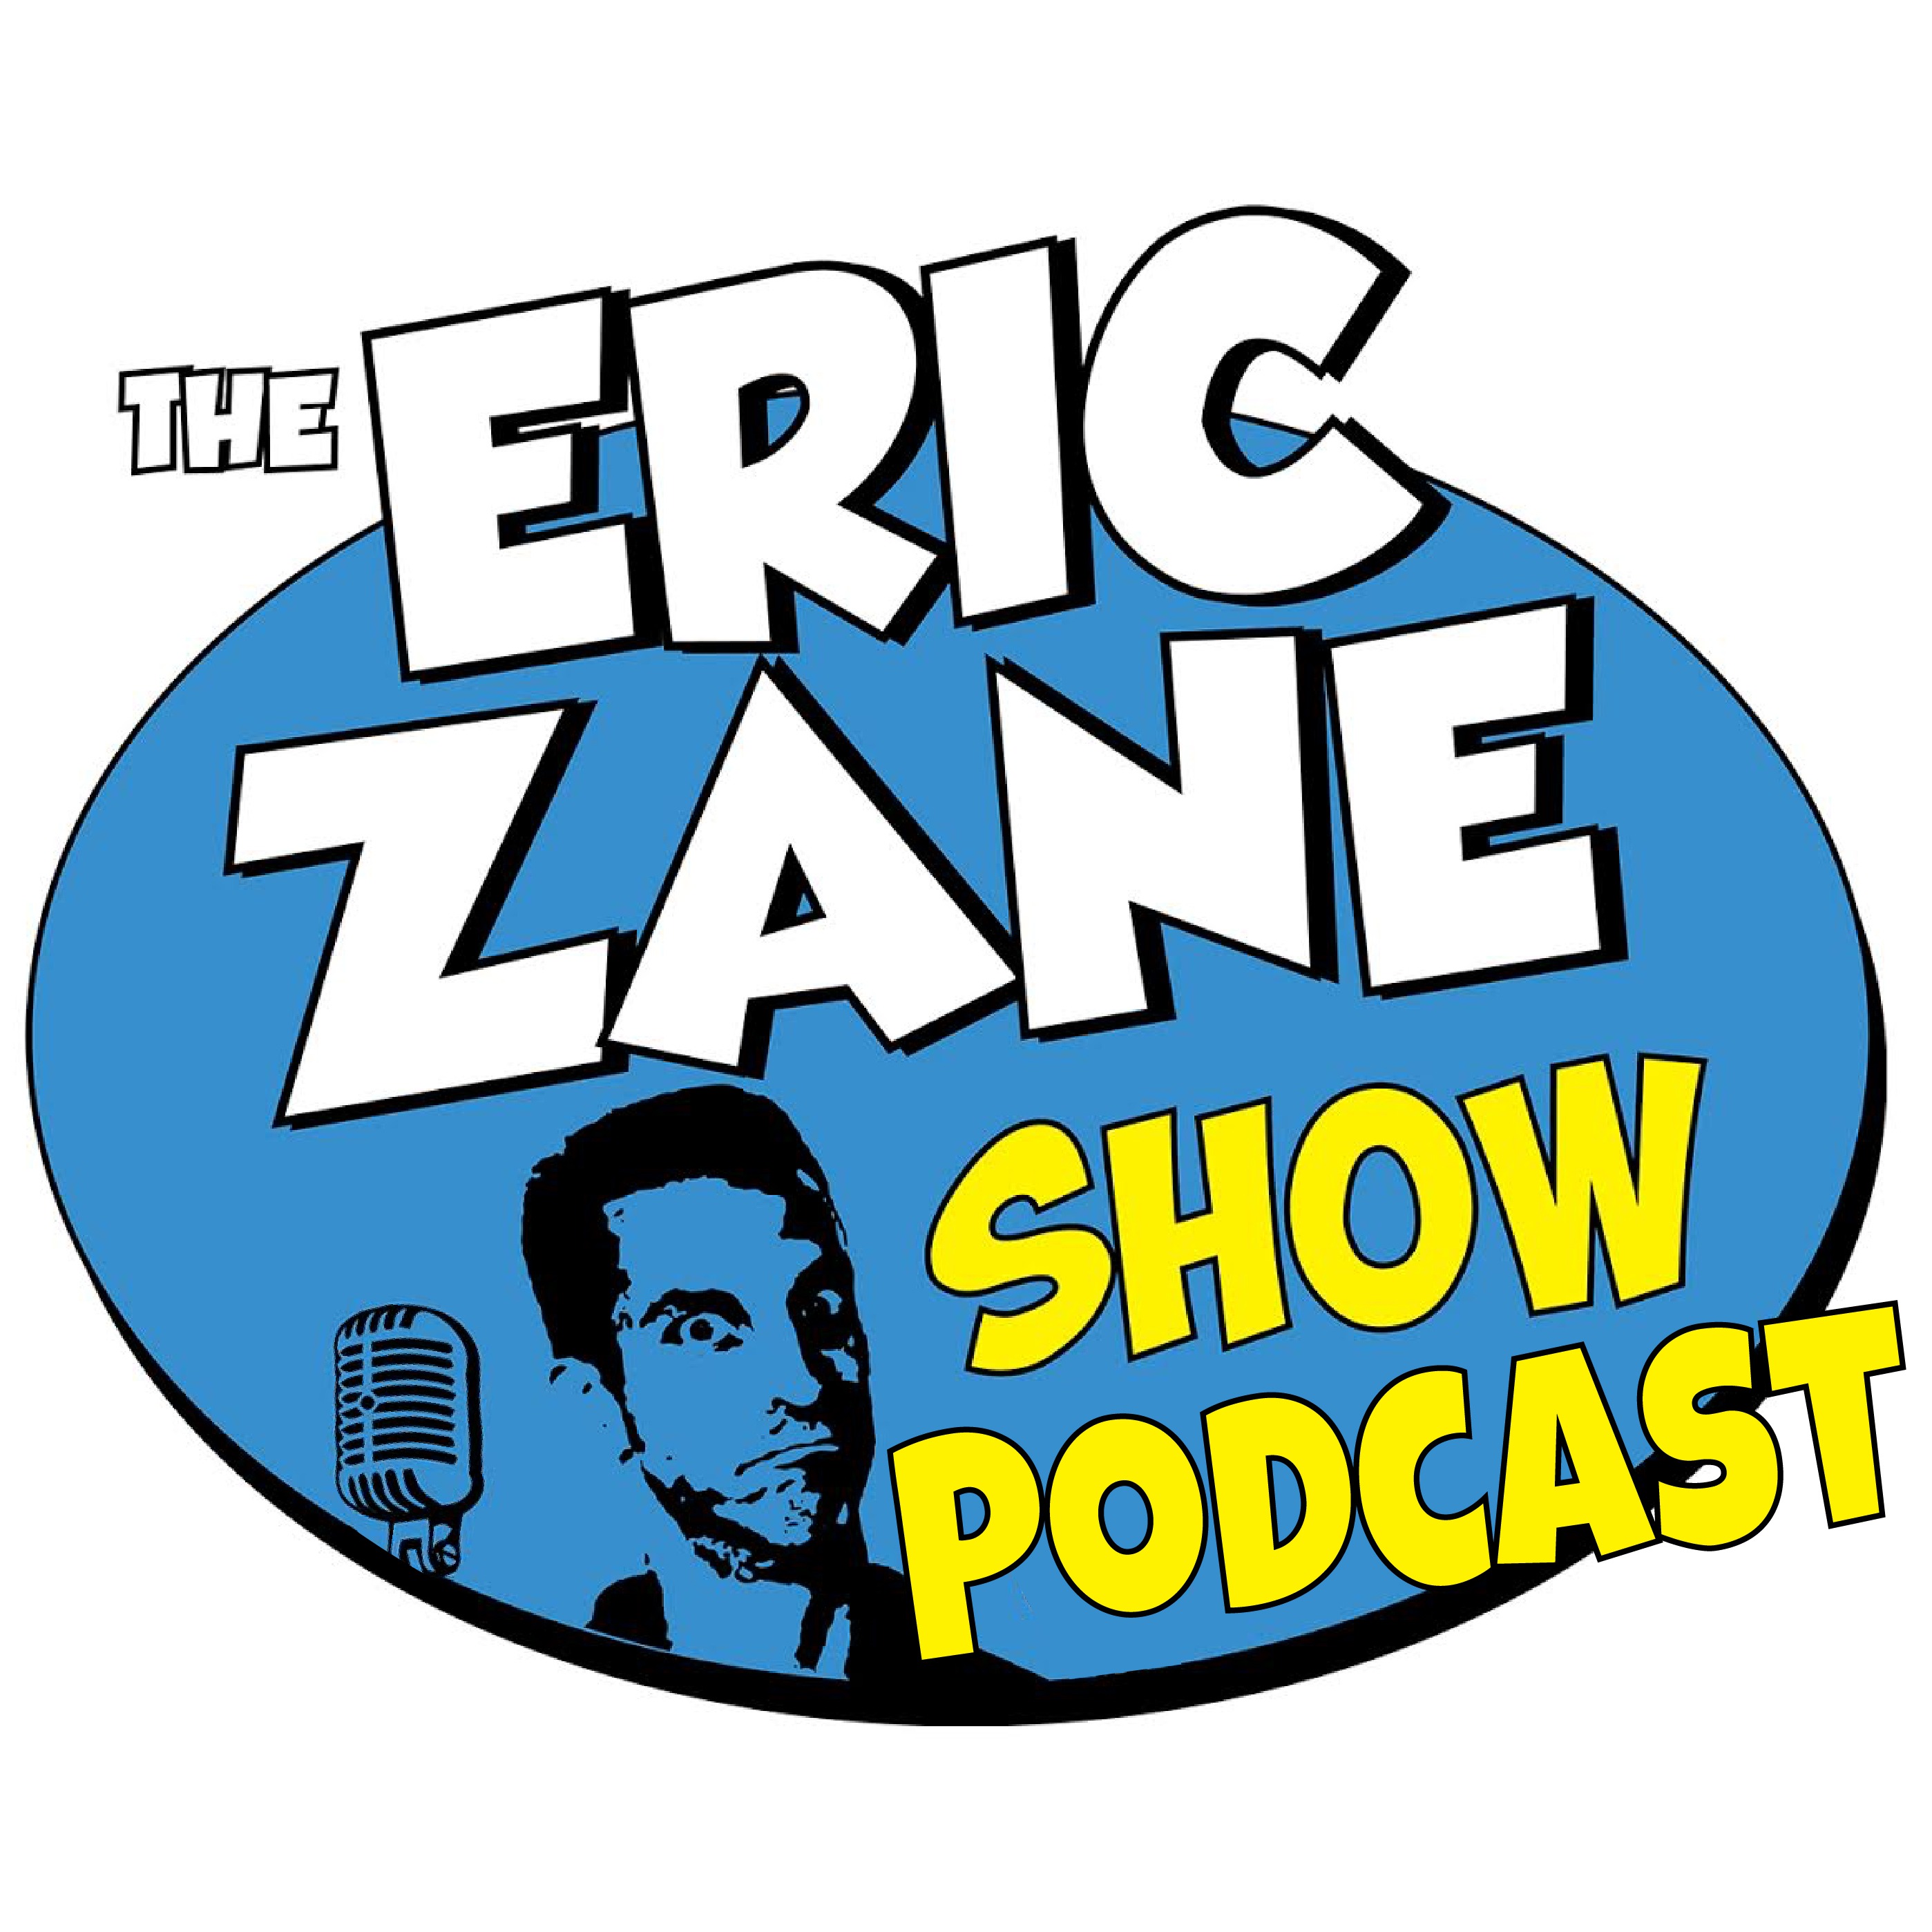 Eric Zane Show Podcast 930 - The worst part about wedding planning:  Craft stores